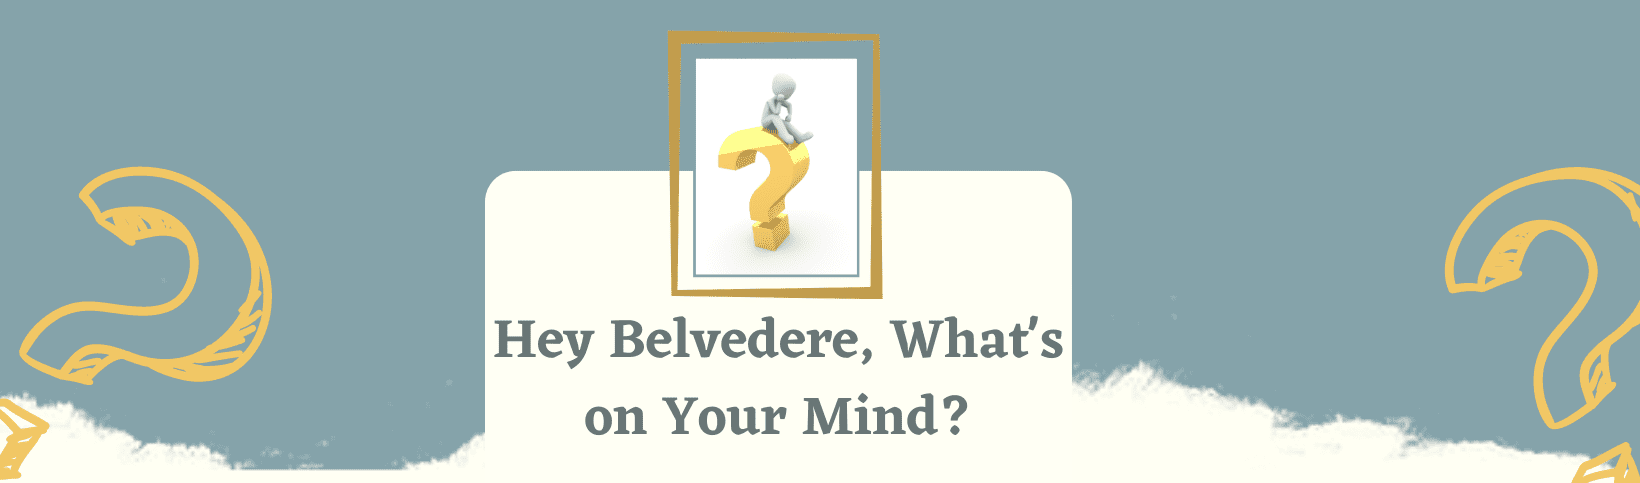 Hey Belvedere, What’s on Your Mind?